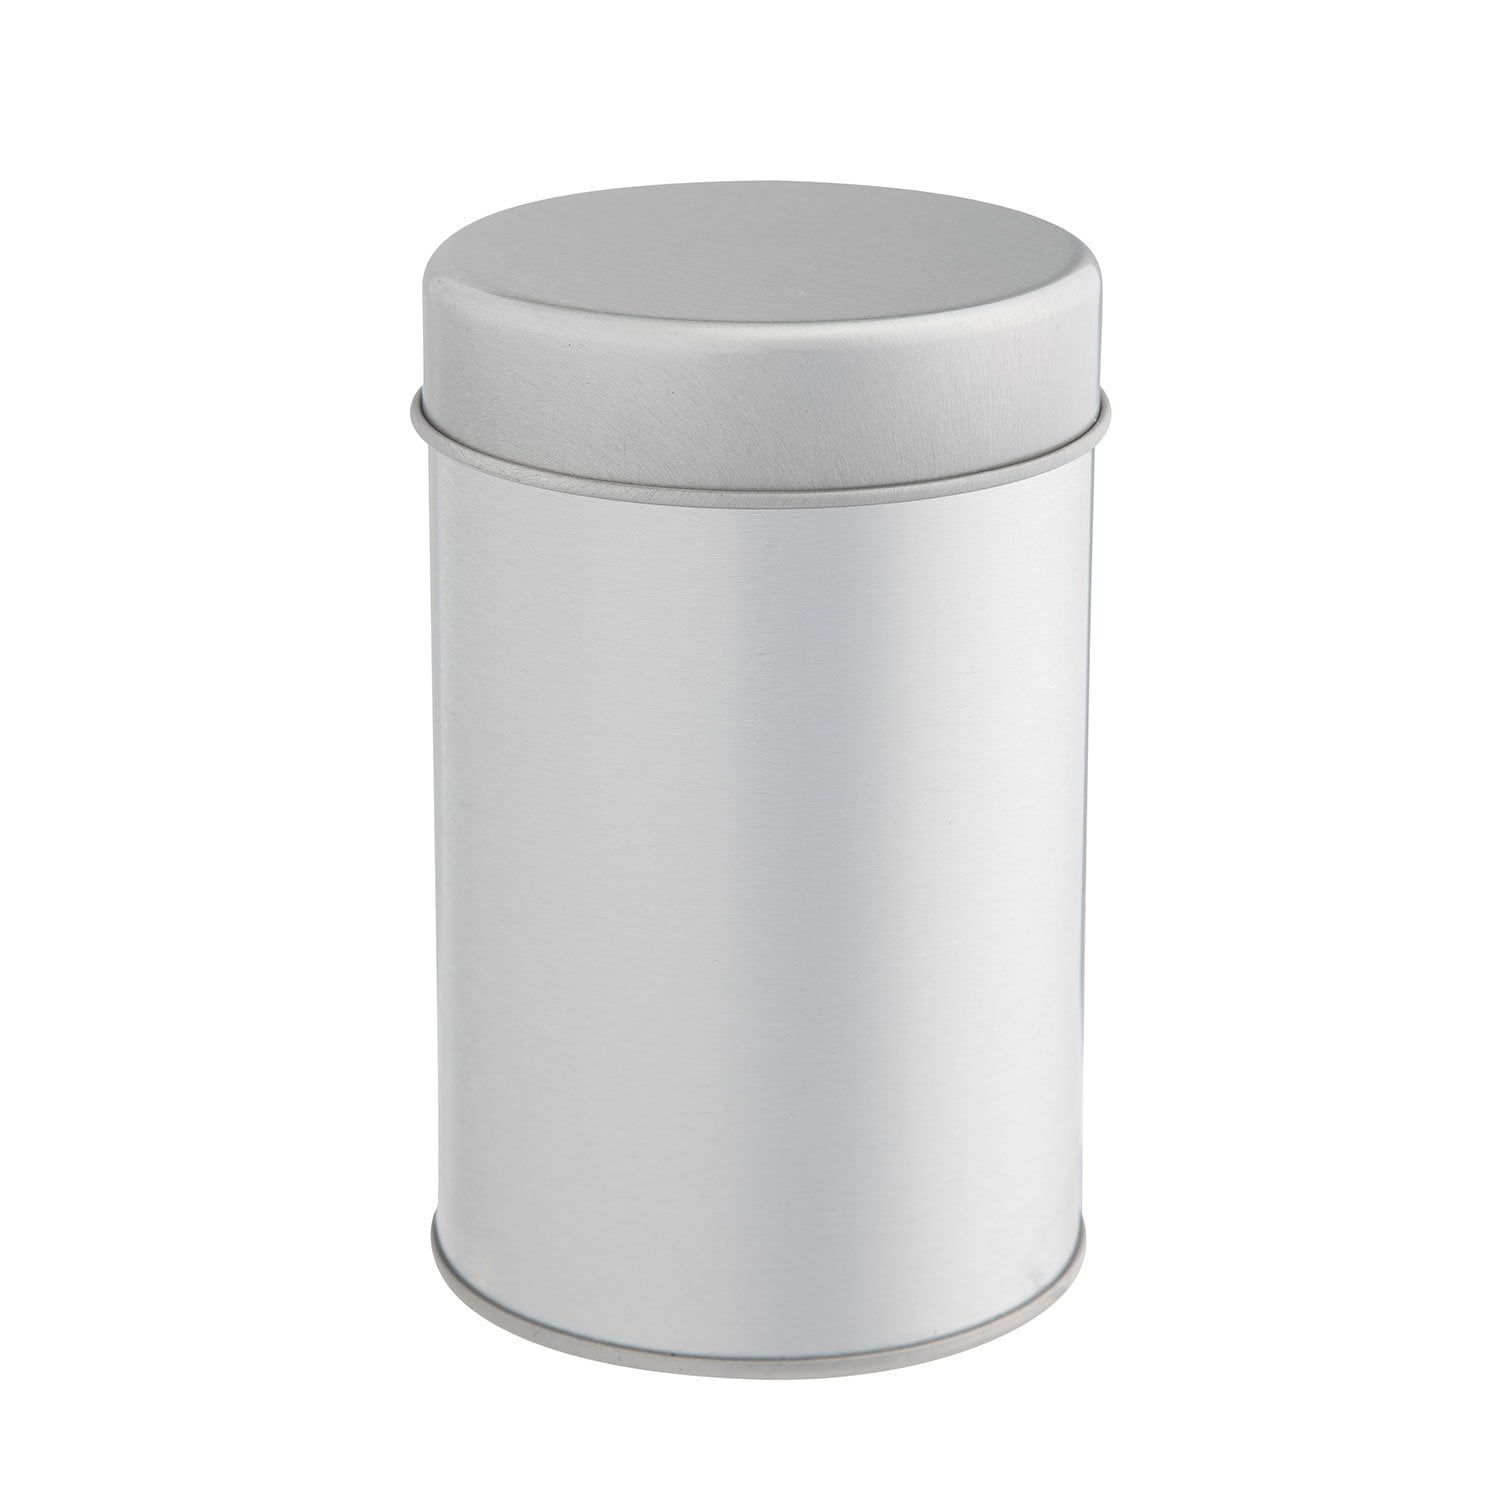 Onyx Airtight Metal Storage Container Set in Small or Large Sizes